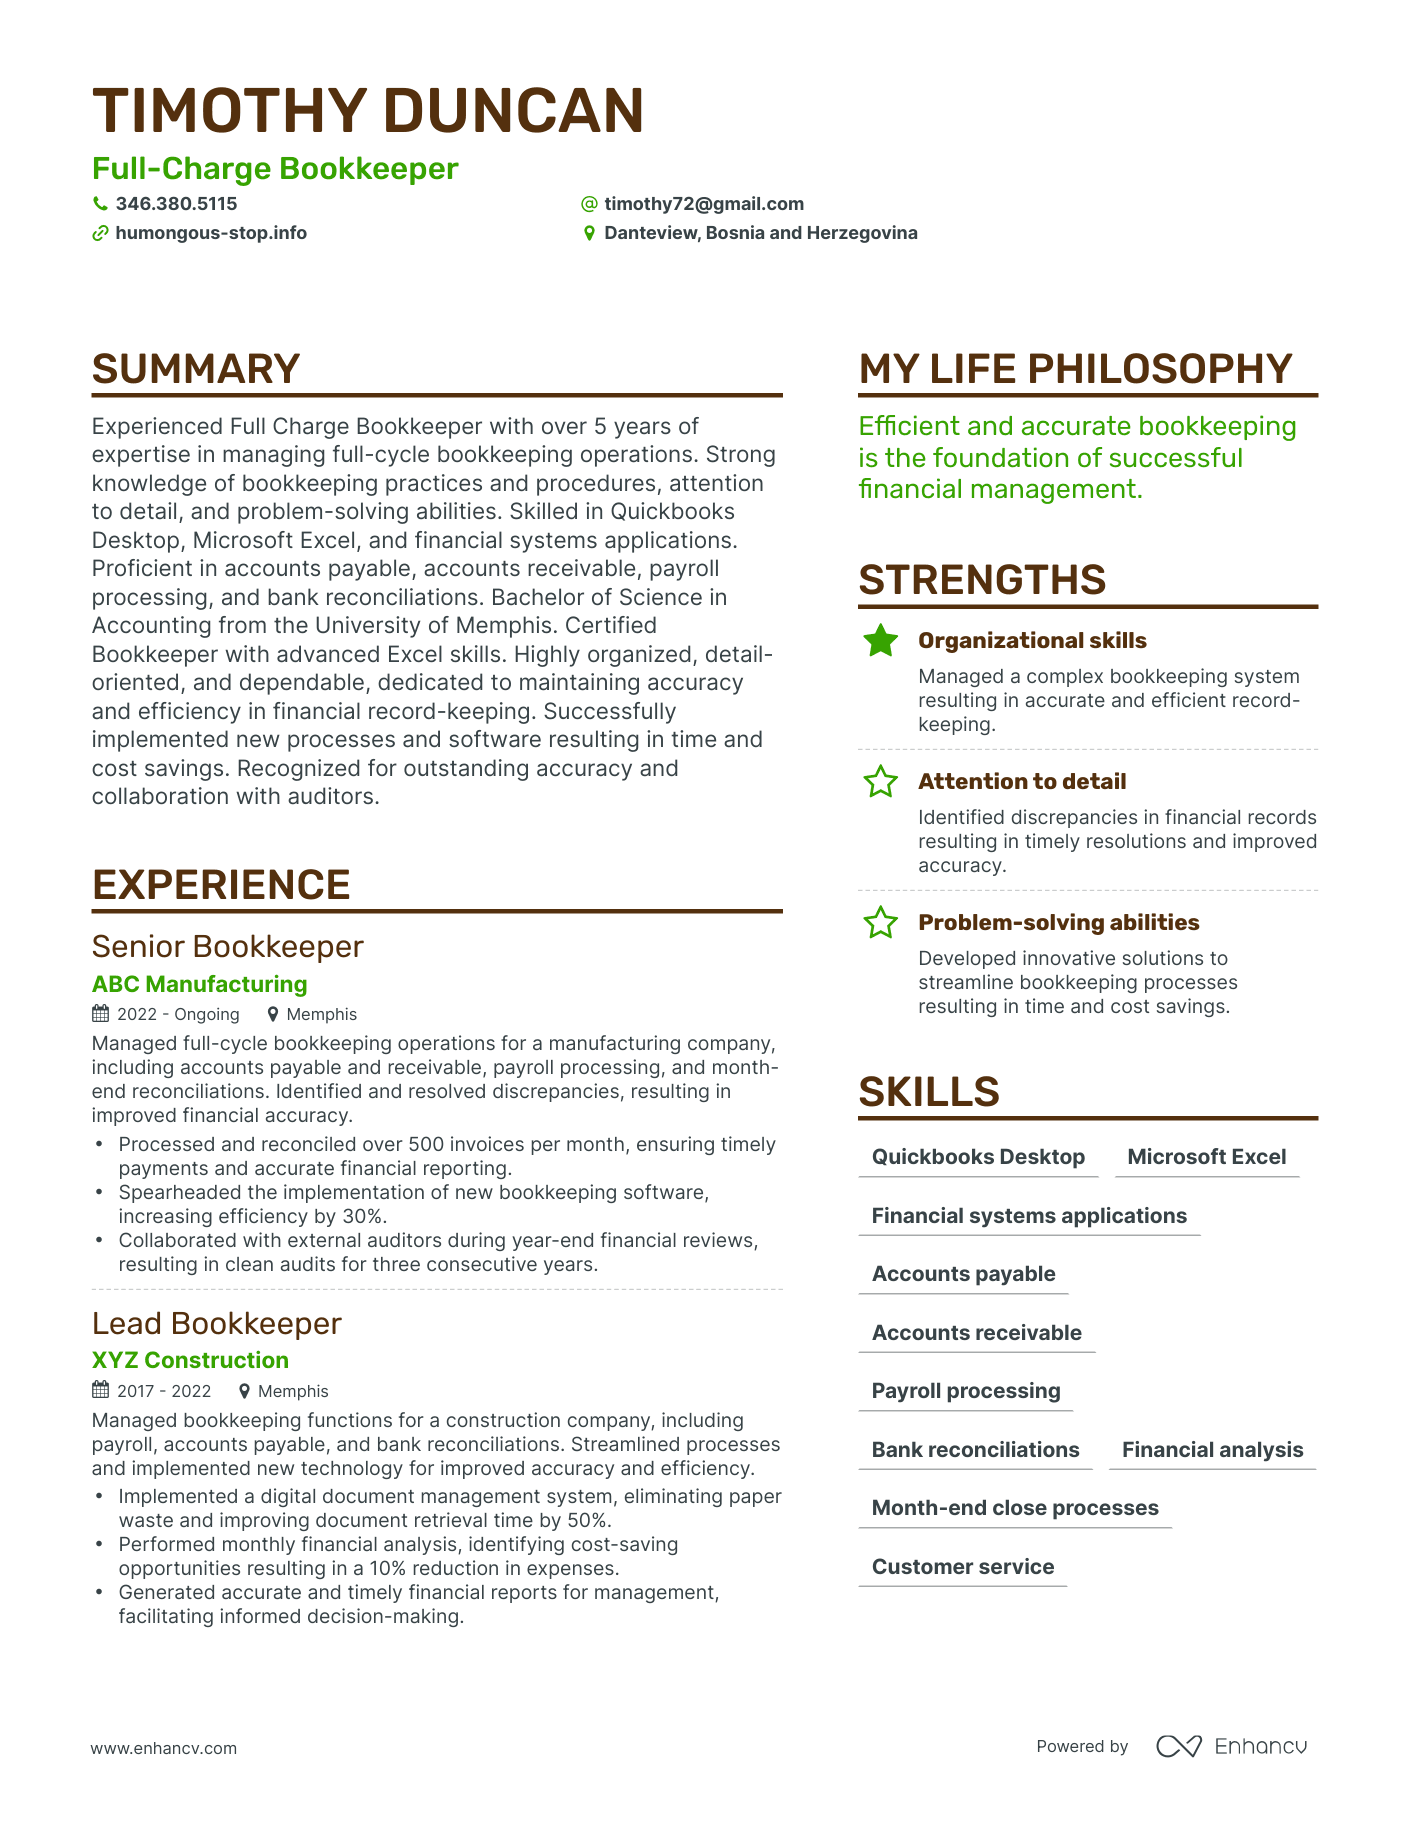 Full-Charge Bookkeeper resume example